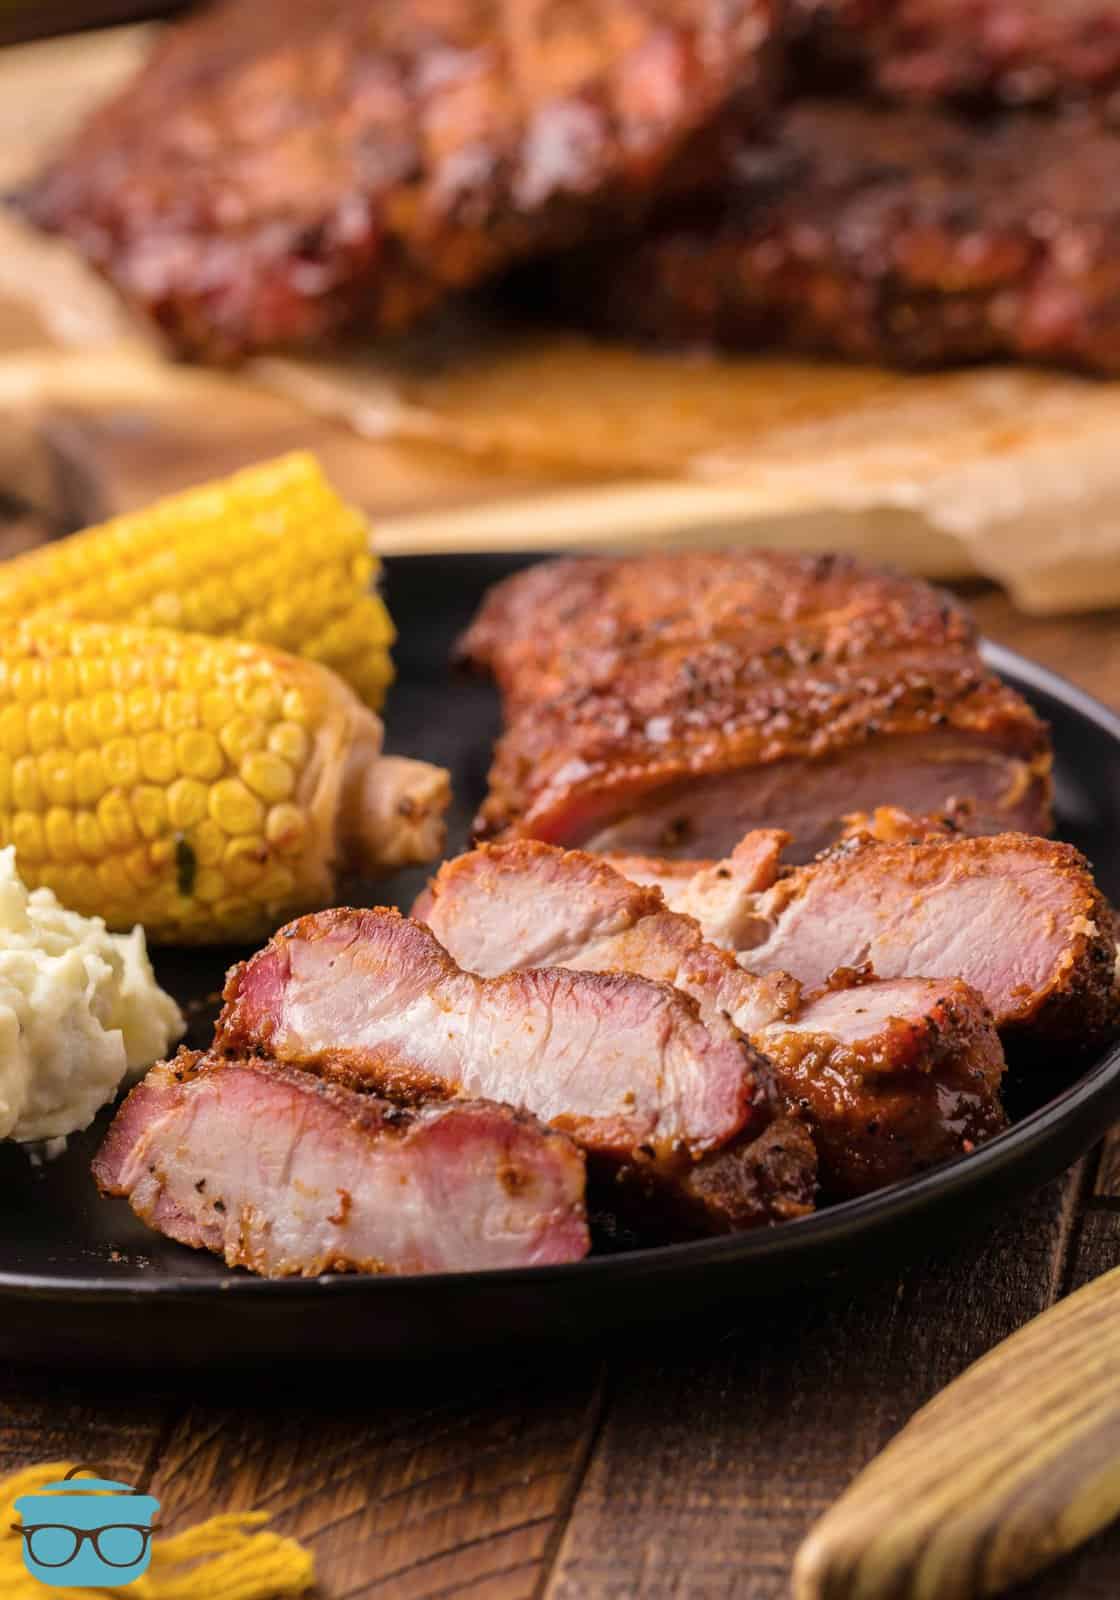 Sliced ​​up Smoked Pork Steaks on plate with corn on the cob.